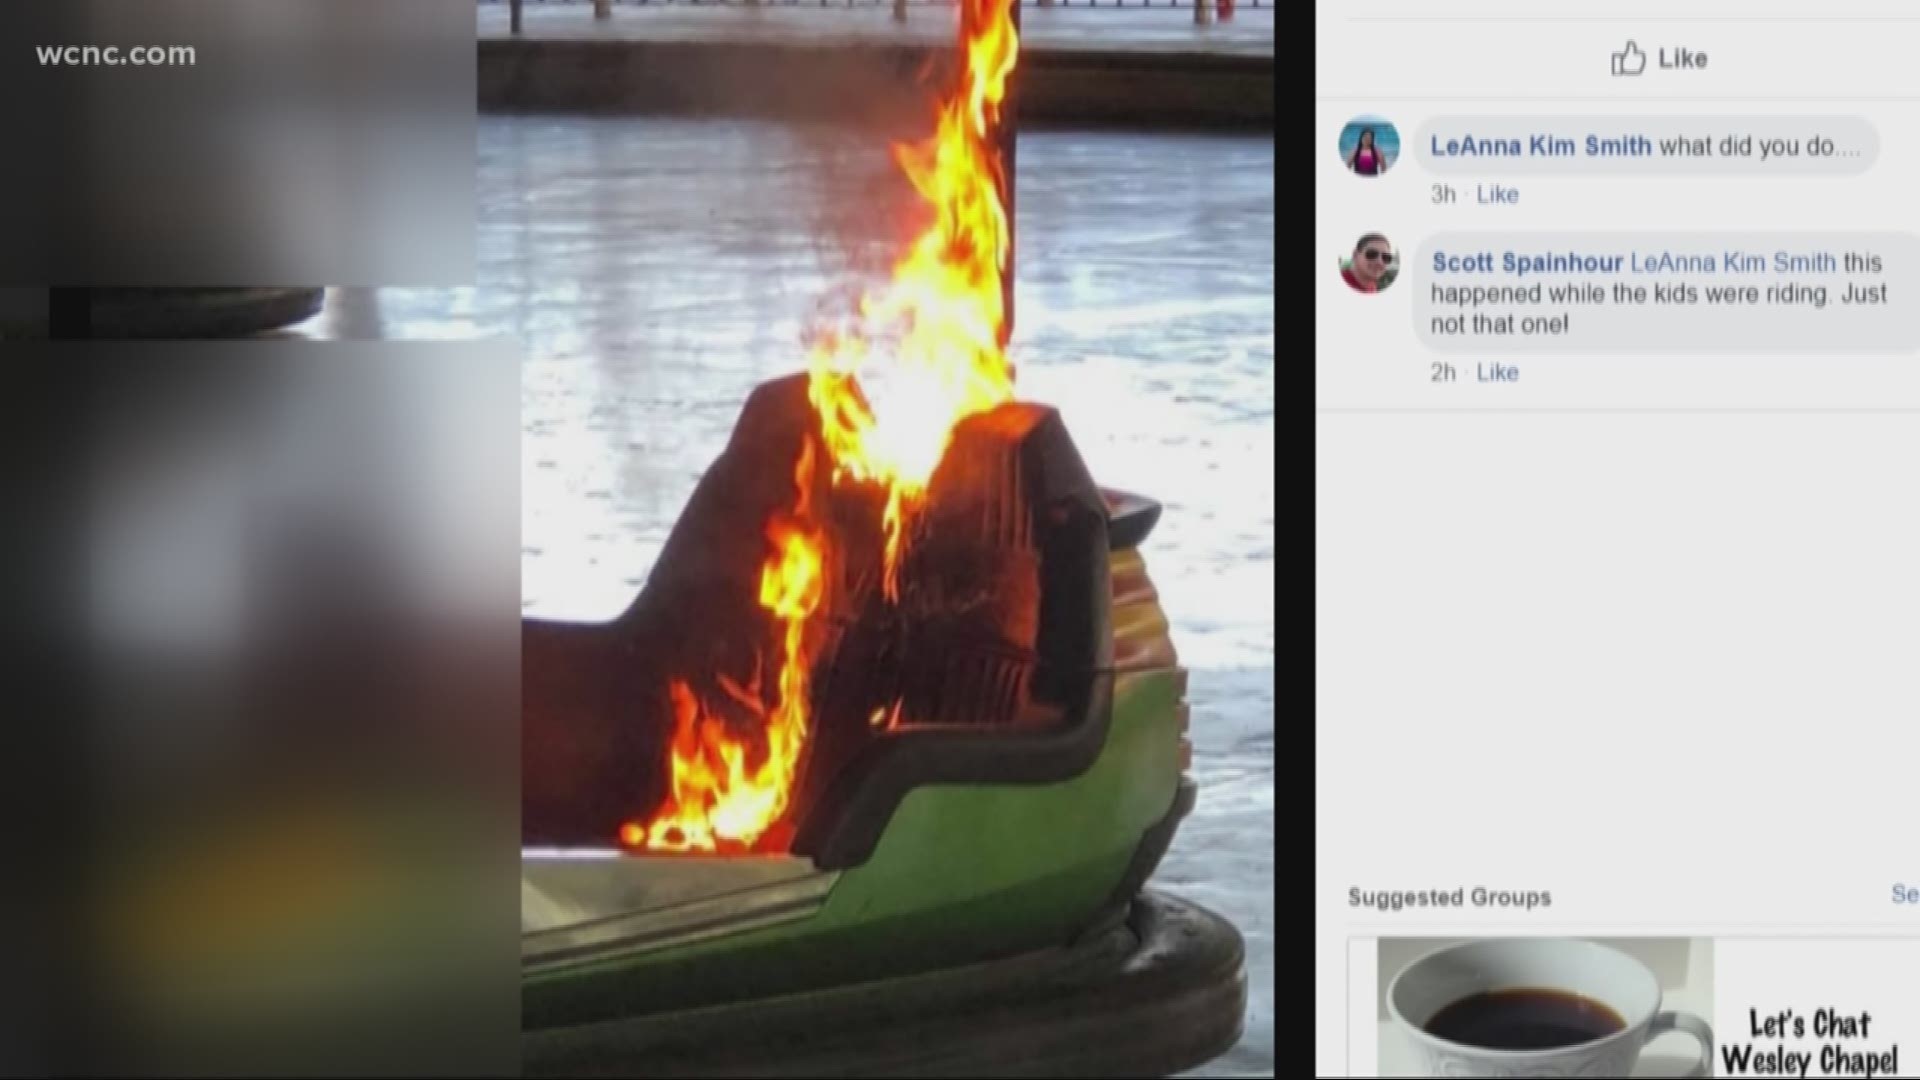 In the video, you can see the flames consuming the bumper car before an attendant grabs a fire extinguisher.